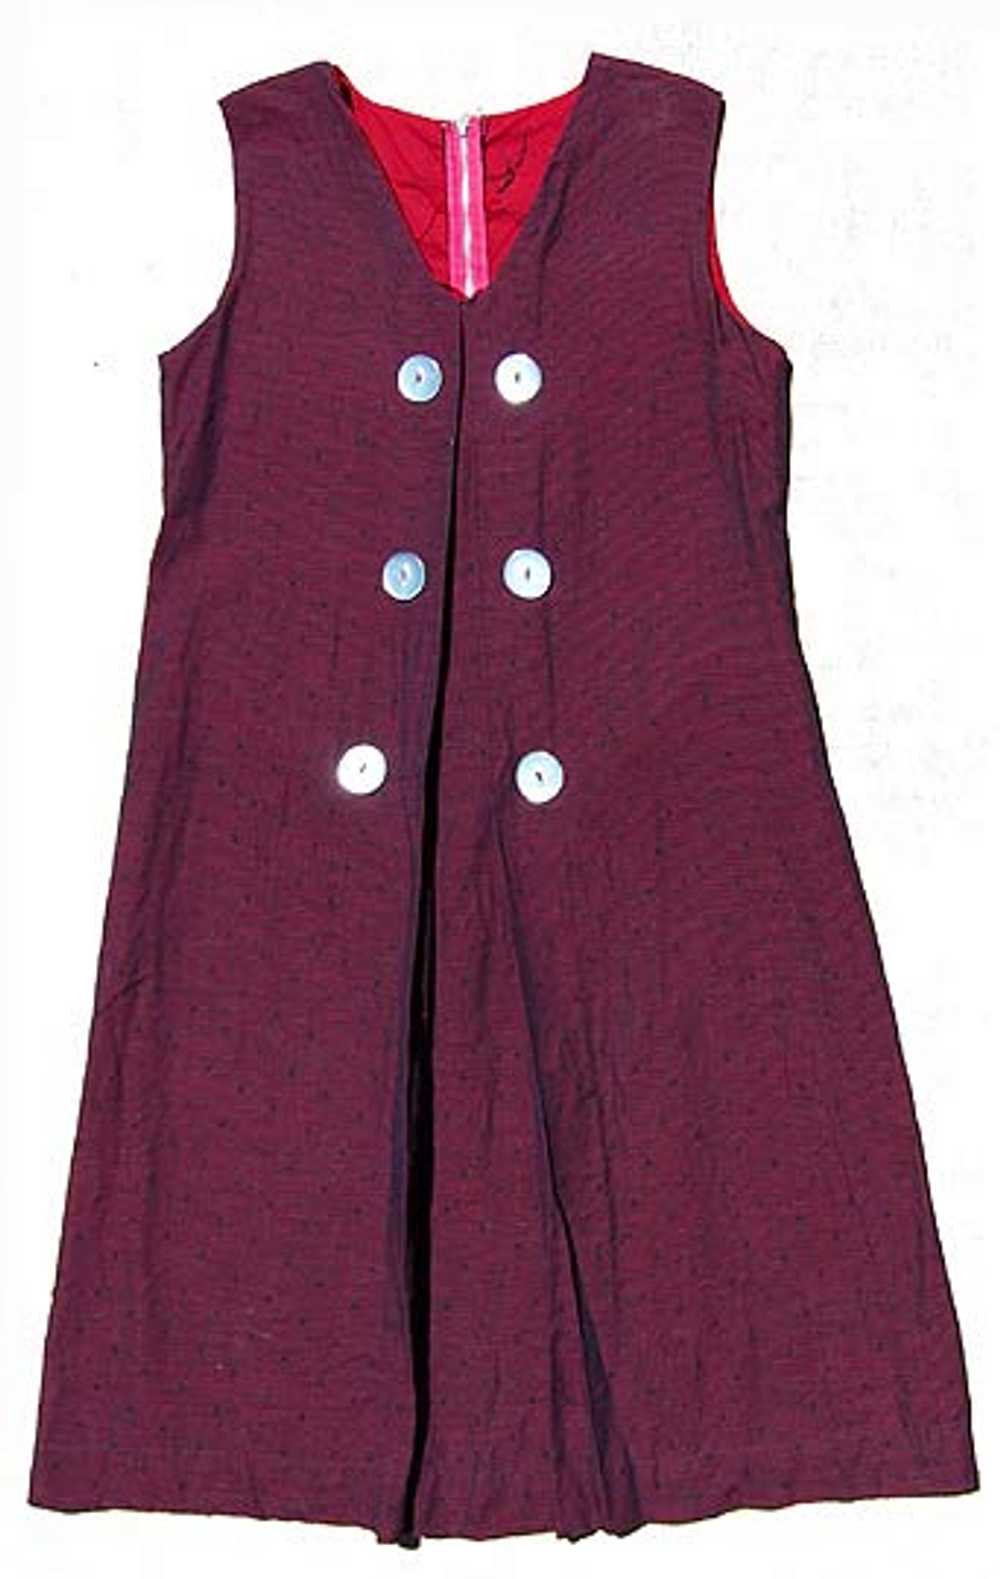 Oxblood dotted playsuit - image 1